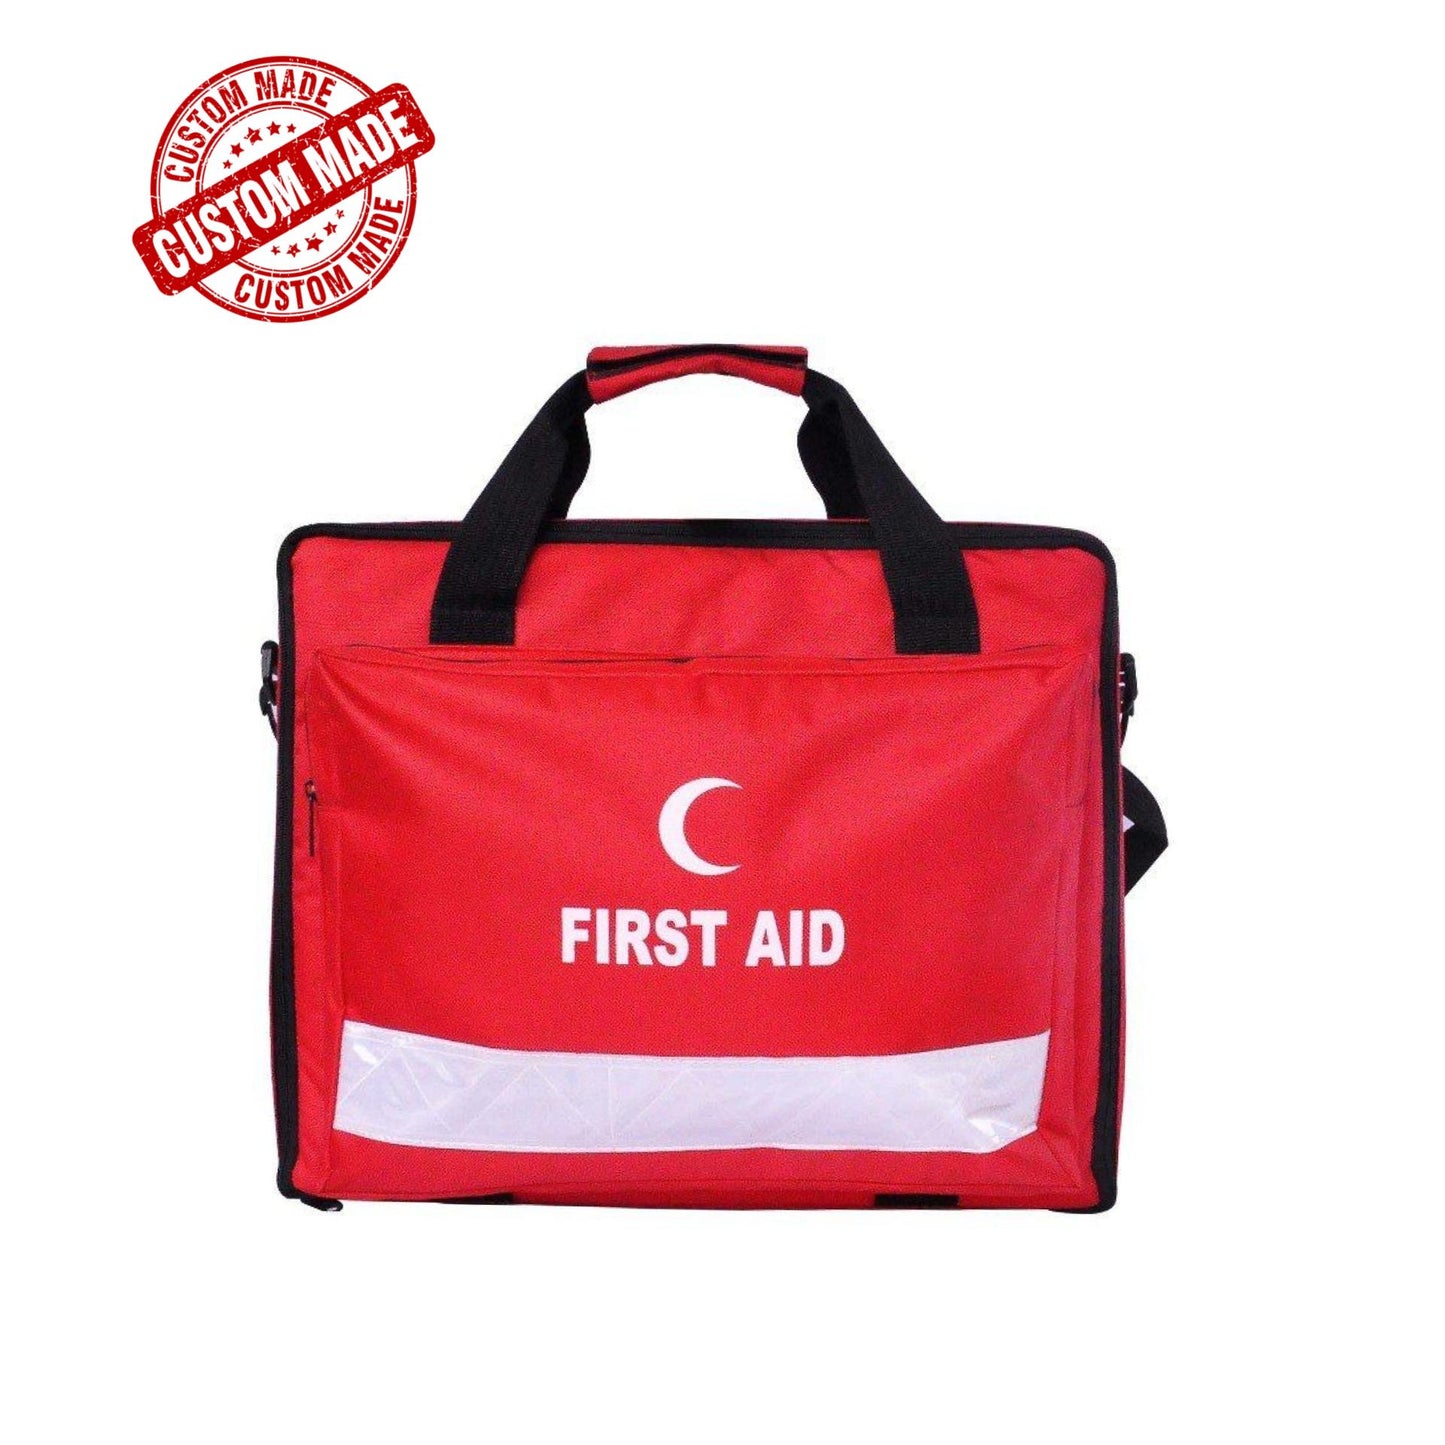 FIRST AID SLING BAG - FABSB43